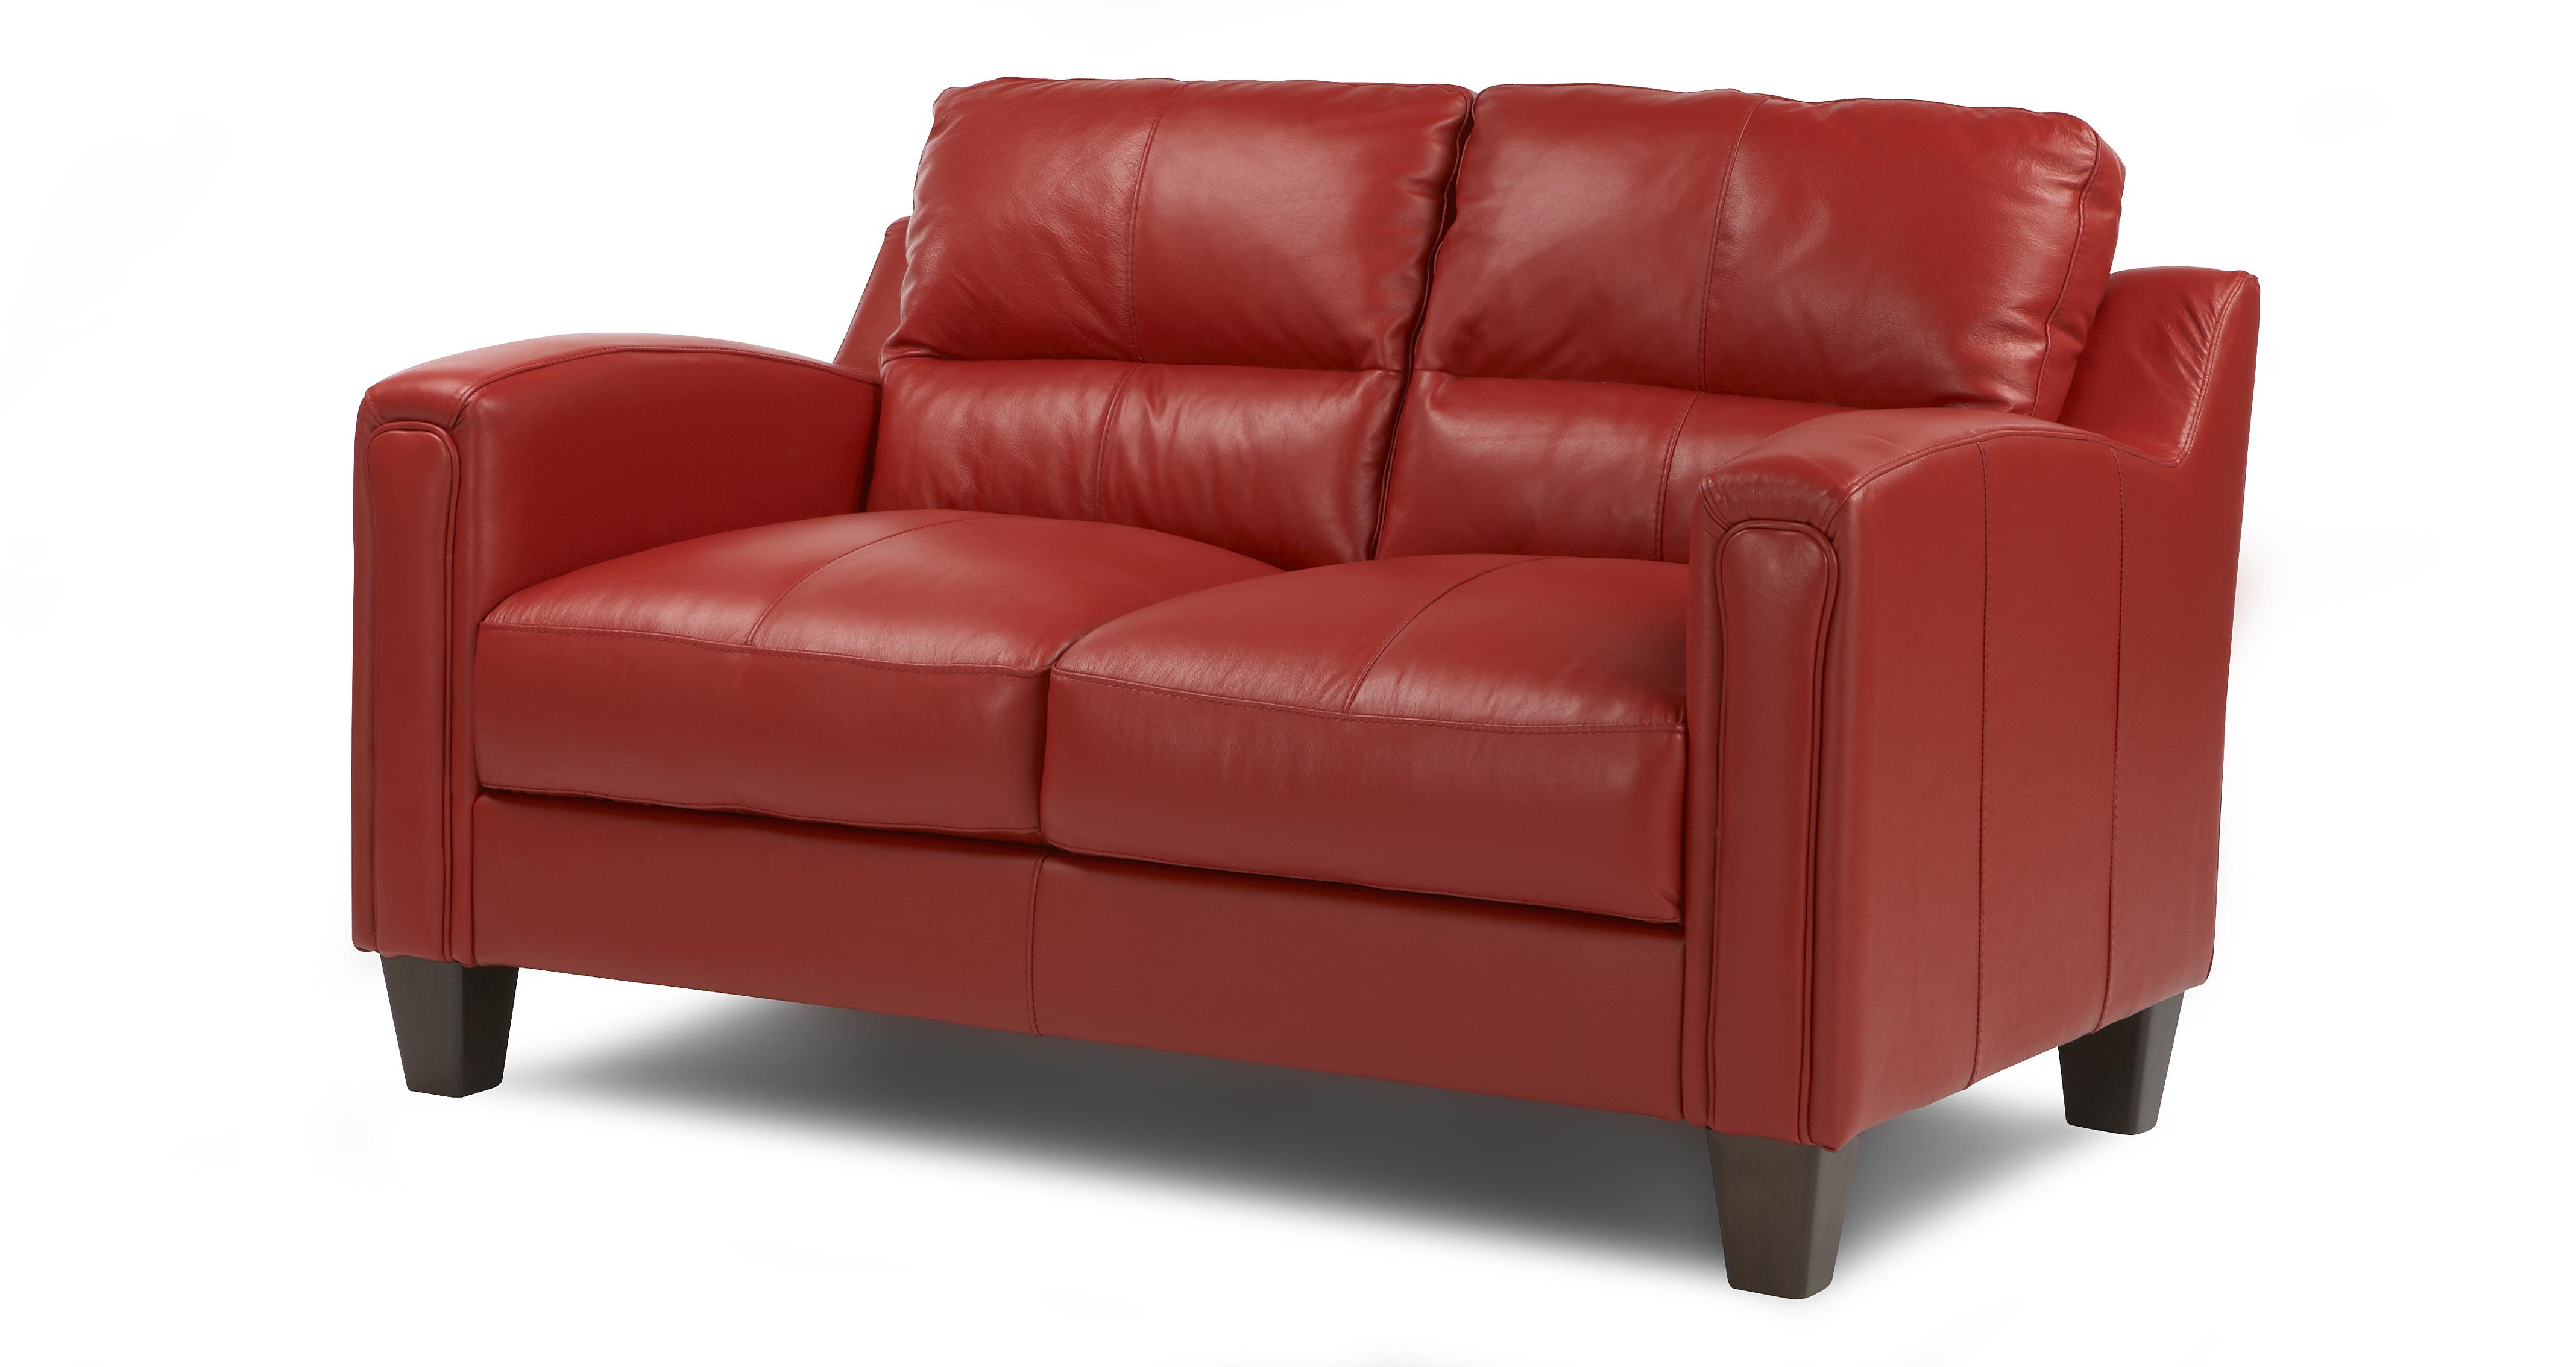 dfs red leather sofa sale